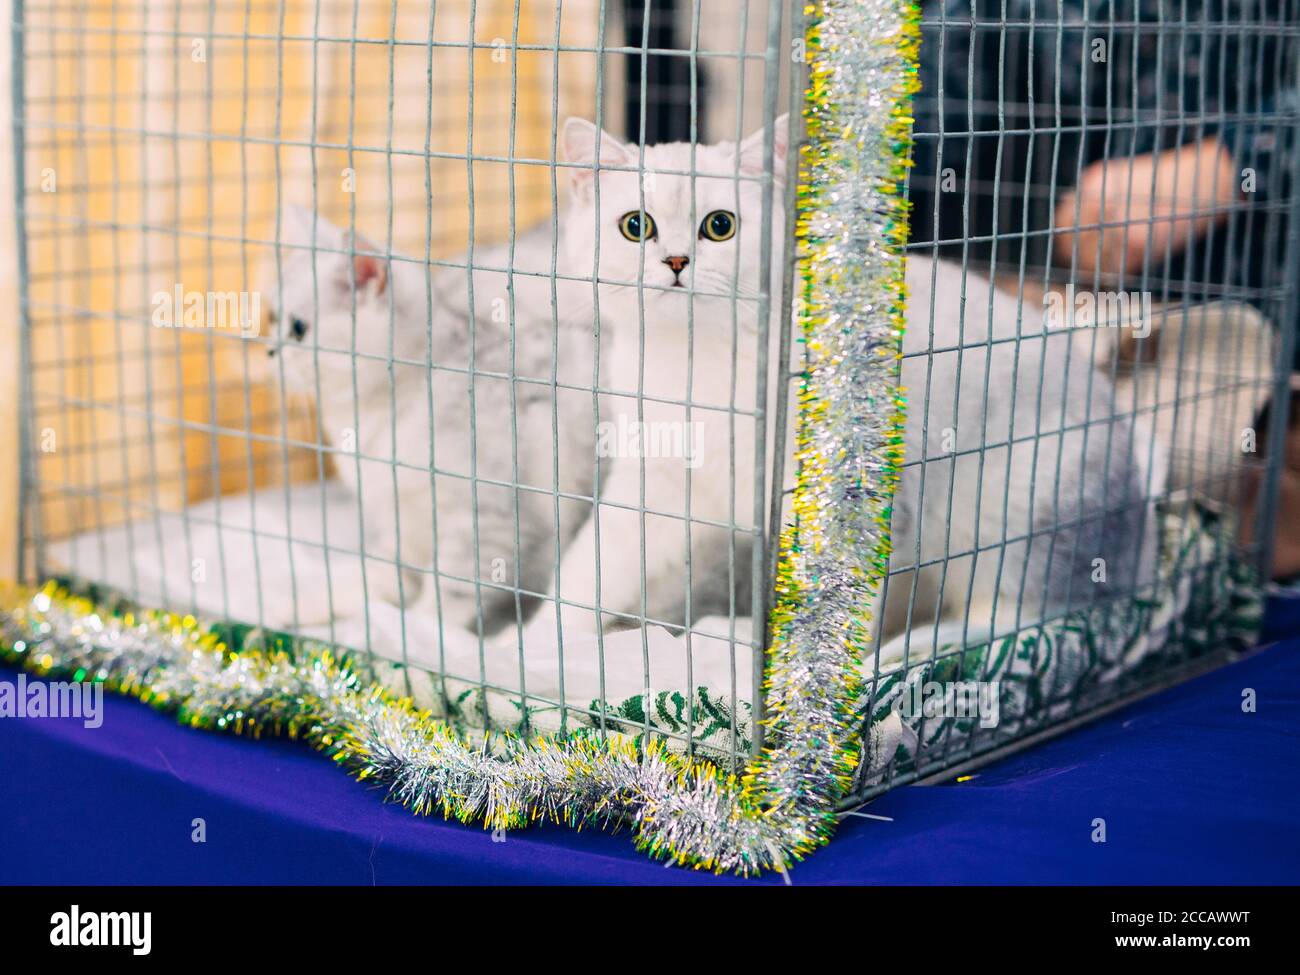 Exhibition or fair cats. Cats in the cage Stock Photo - Alamy